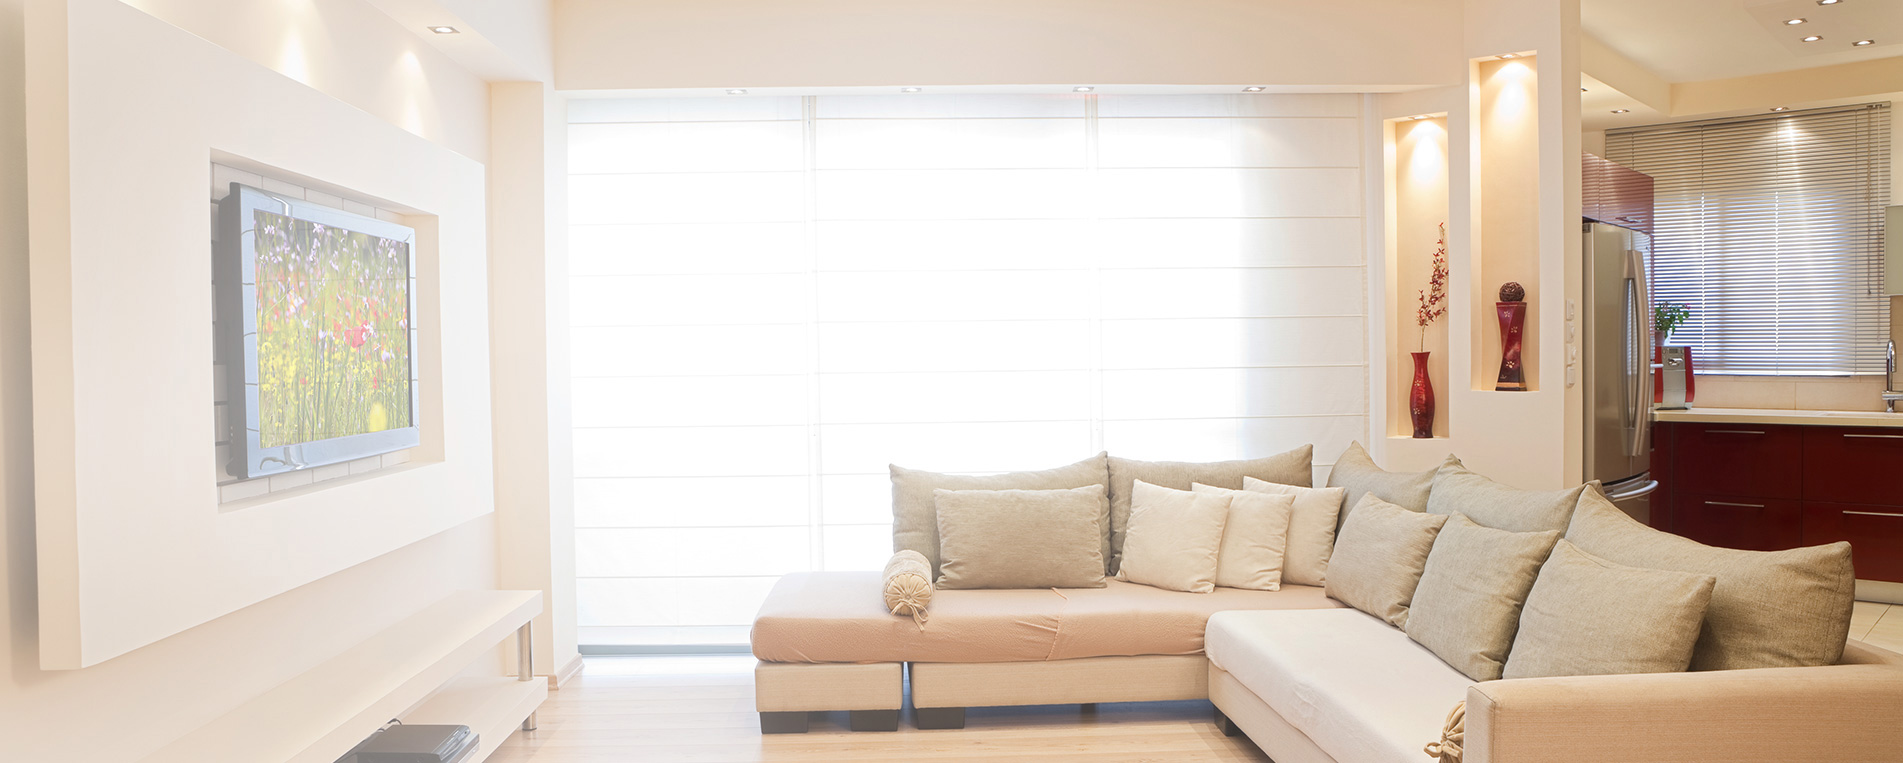 Save Money And Keep Your Home Comfortable With Motorized Shades